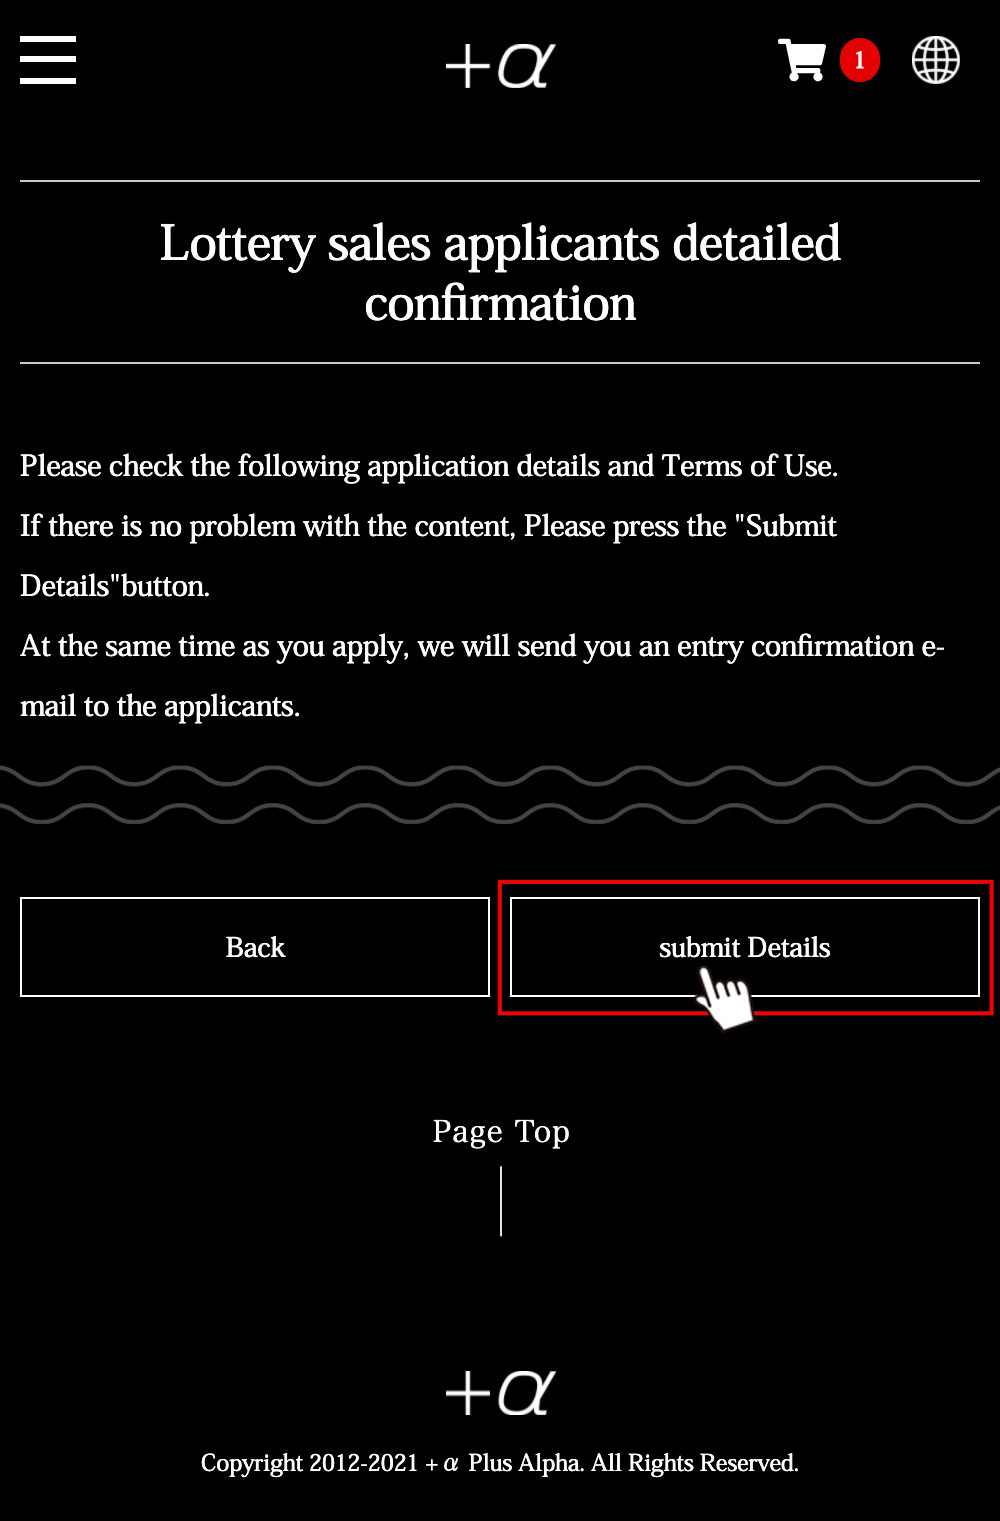 Confirmation of order details, application completed